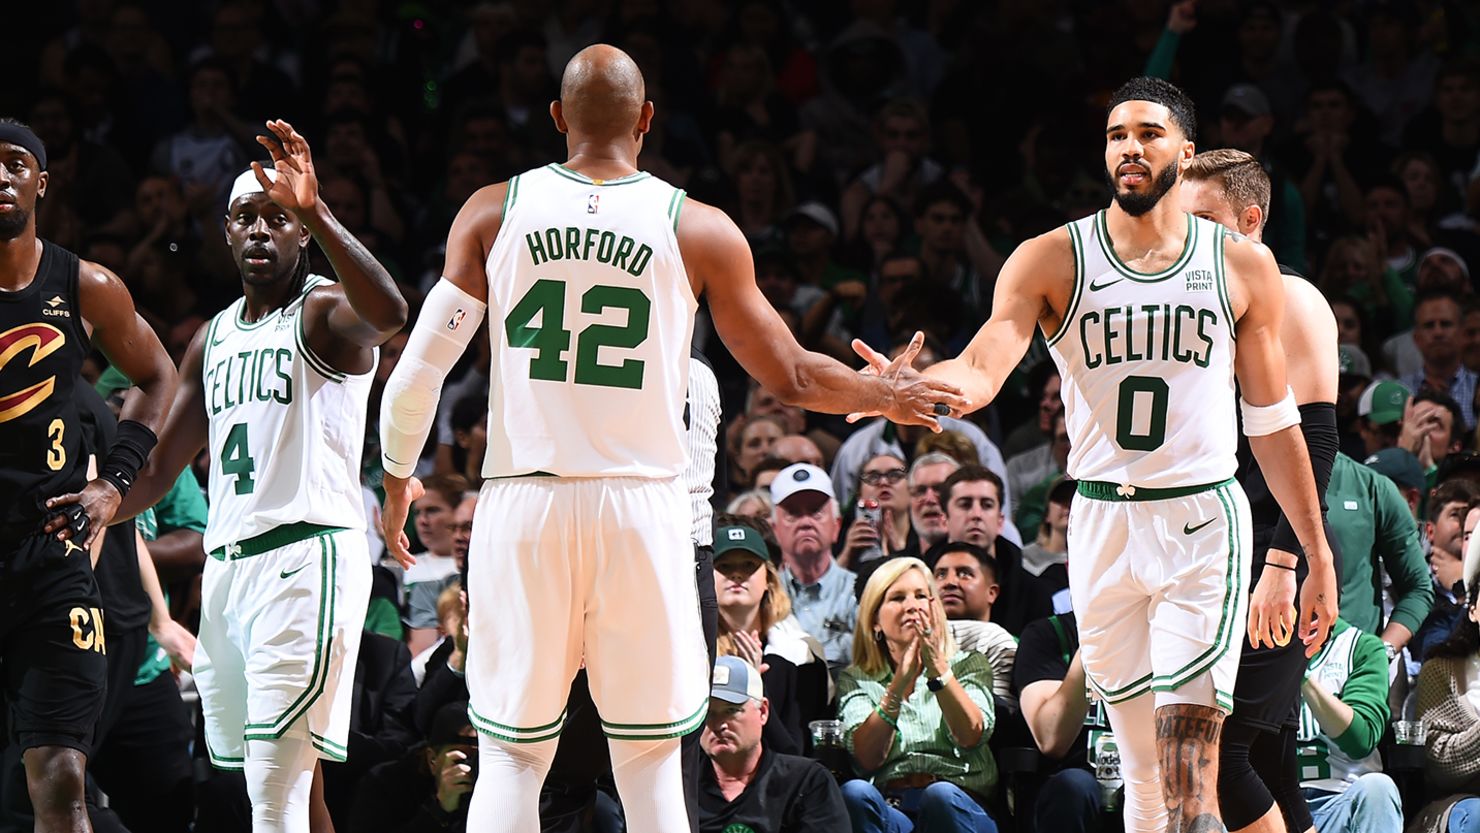 The Celtics eased to a Game 1 victory at home.